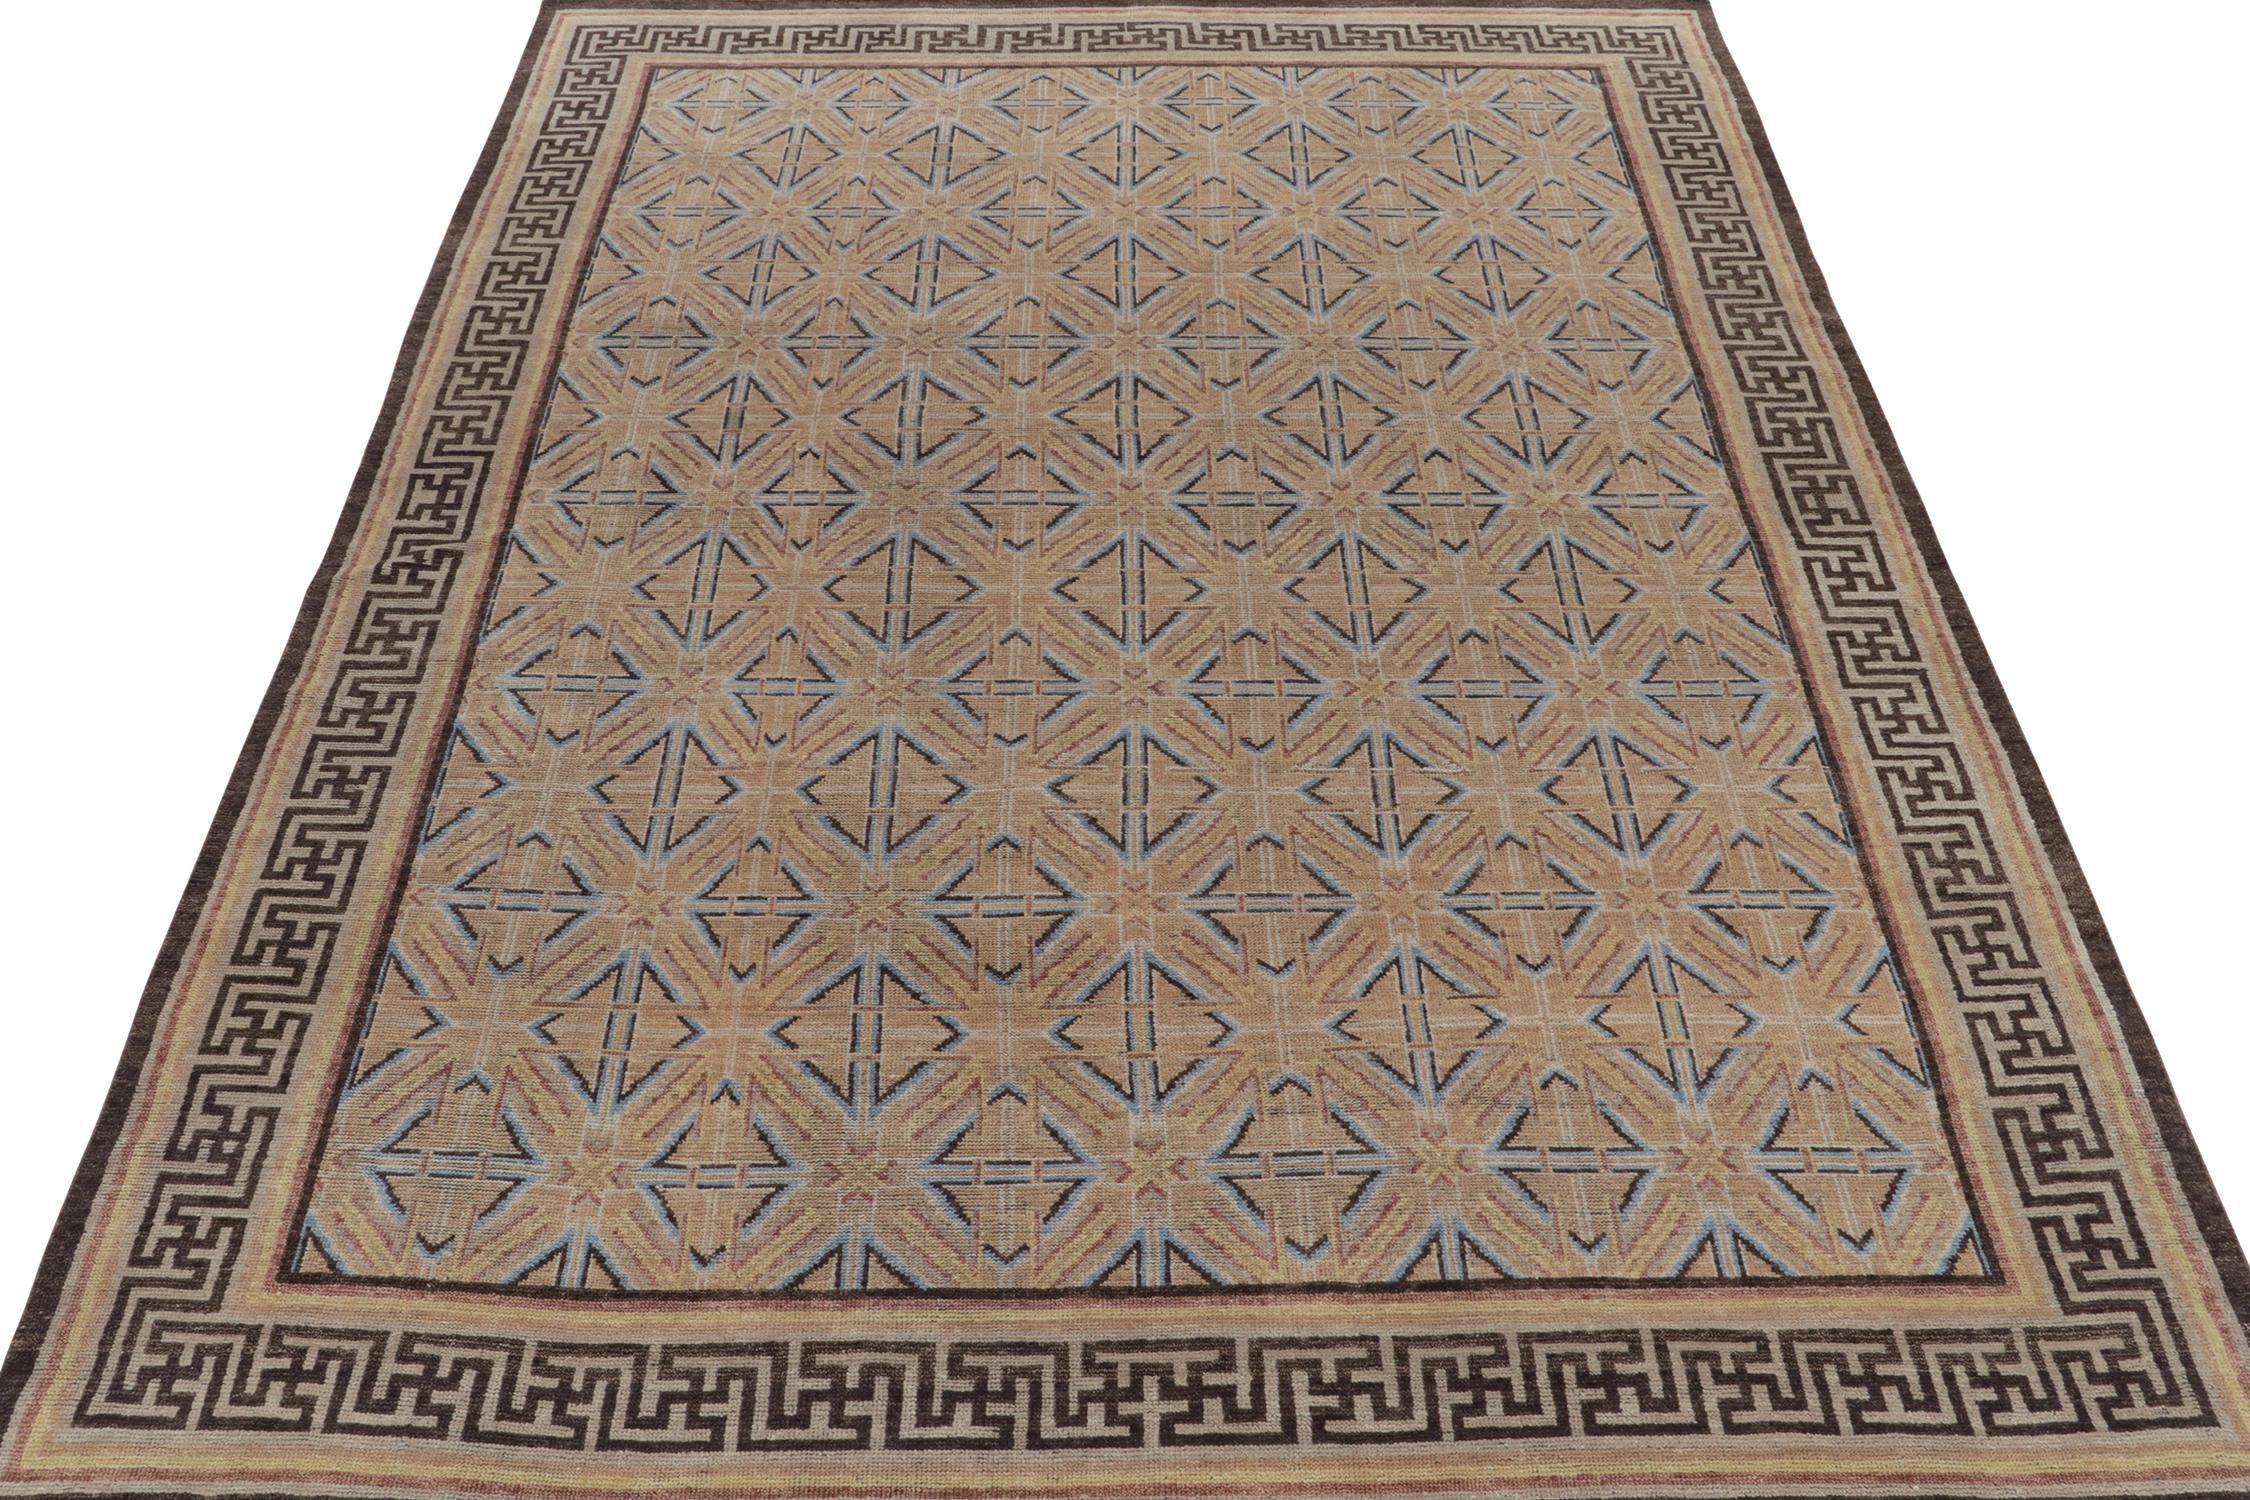 Indian Rug & Kilim’s 18th Century Chinese Style Rug in Beige-Brown and Blue Patterns For Sale